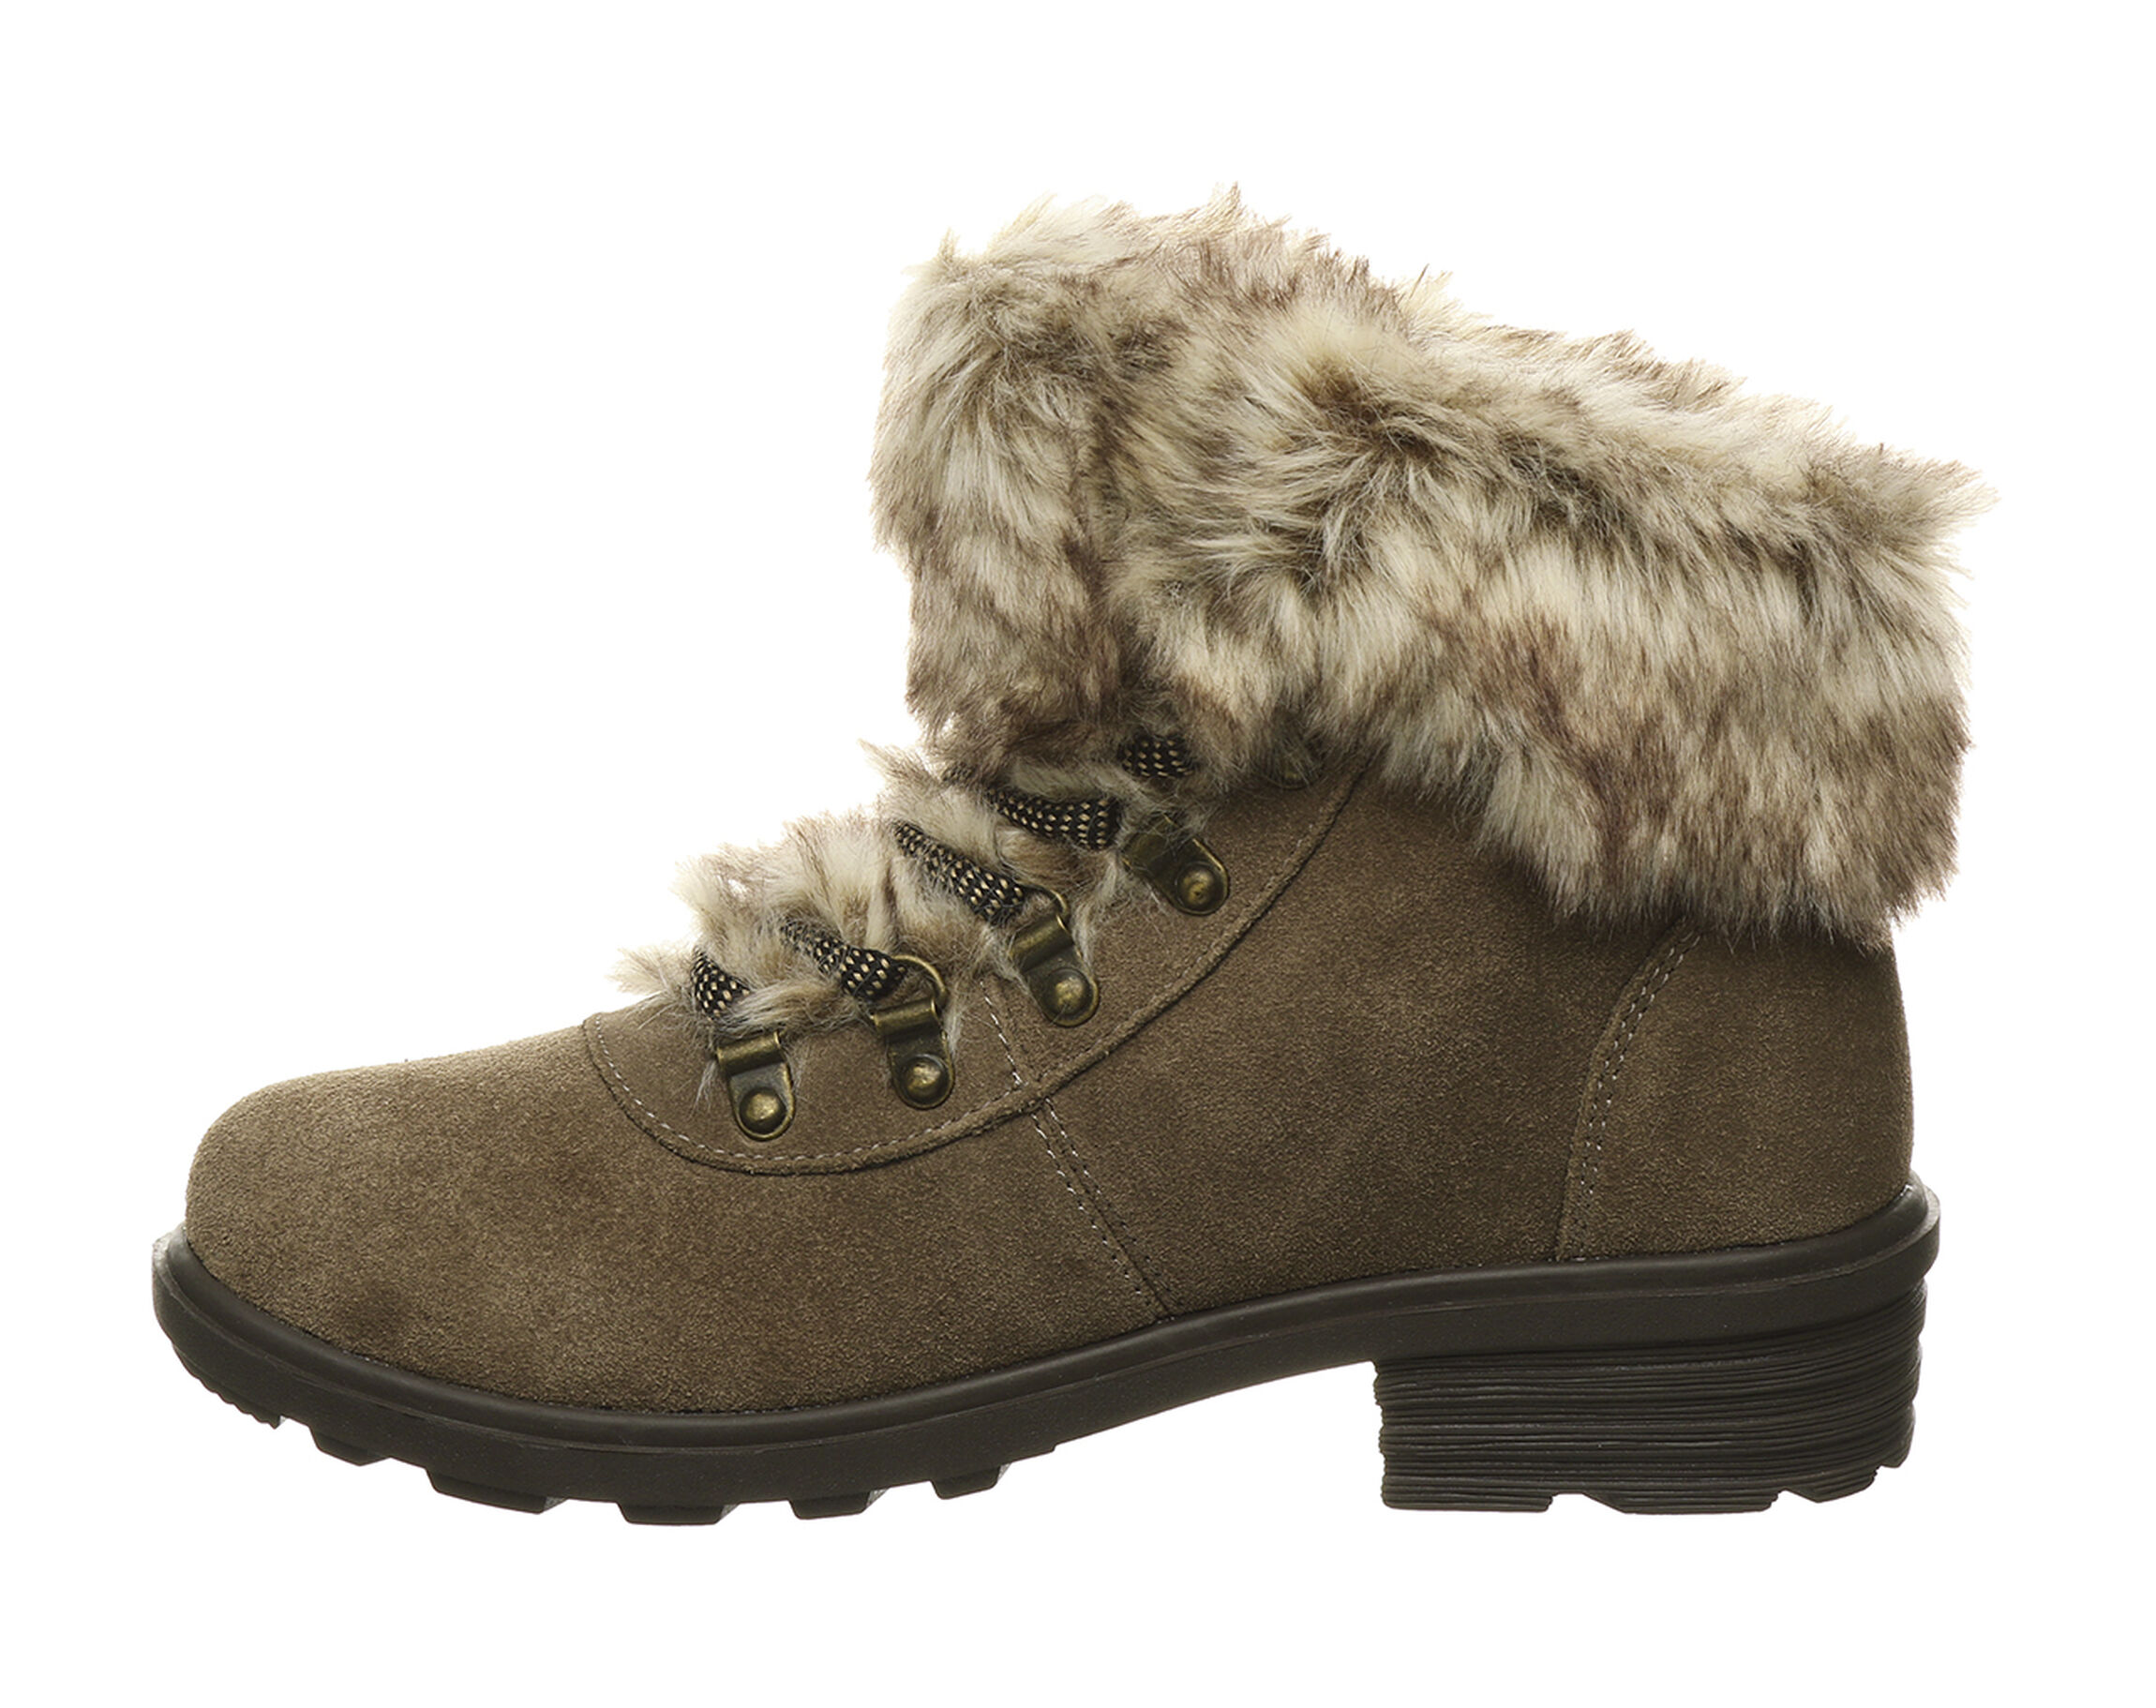 Bearpaw Women's Serenity Winter Boot Select Color/Size